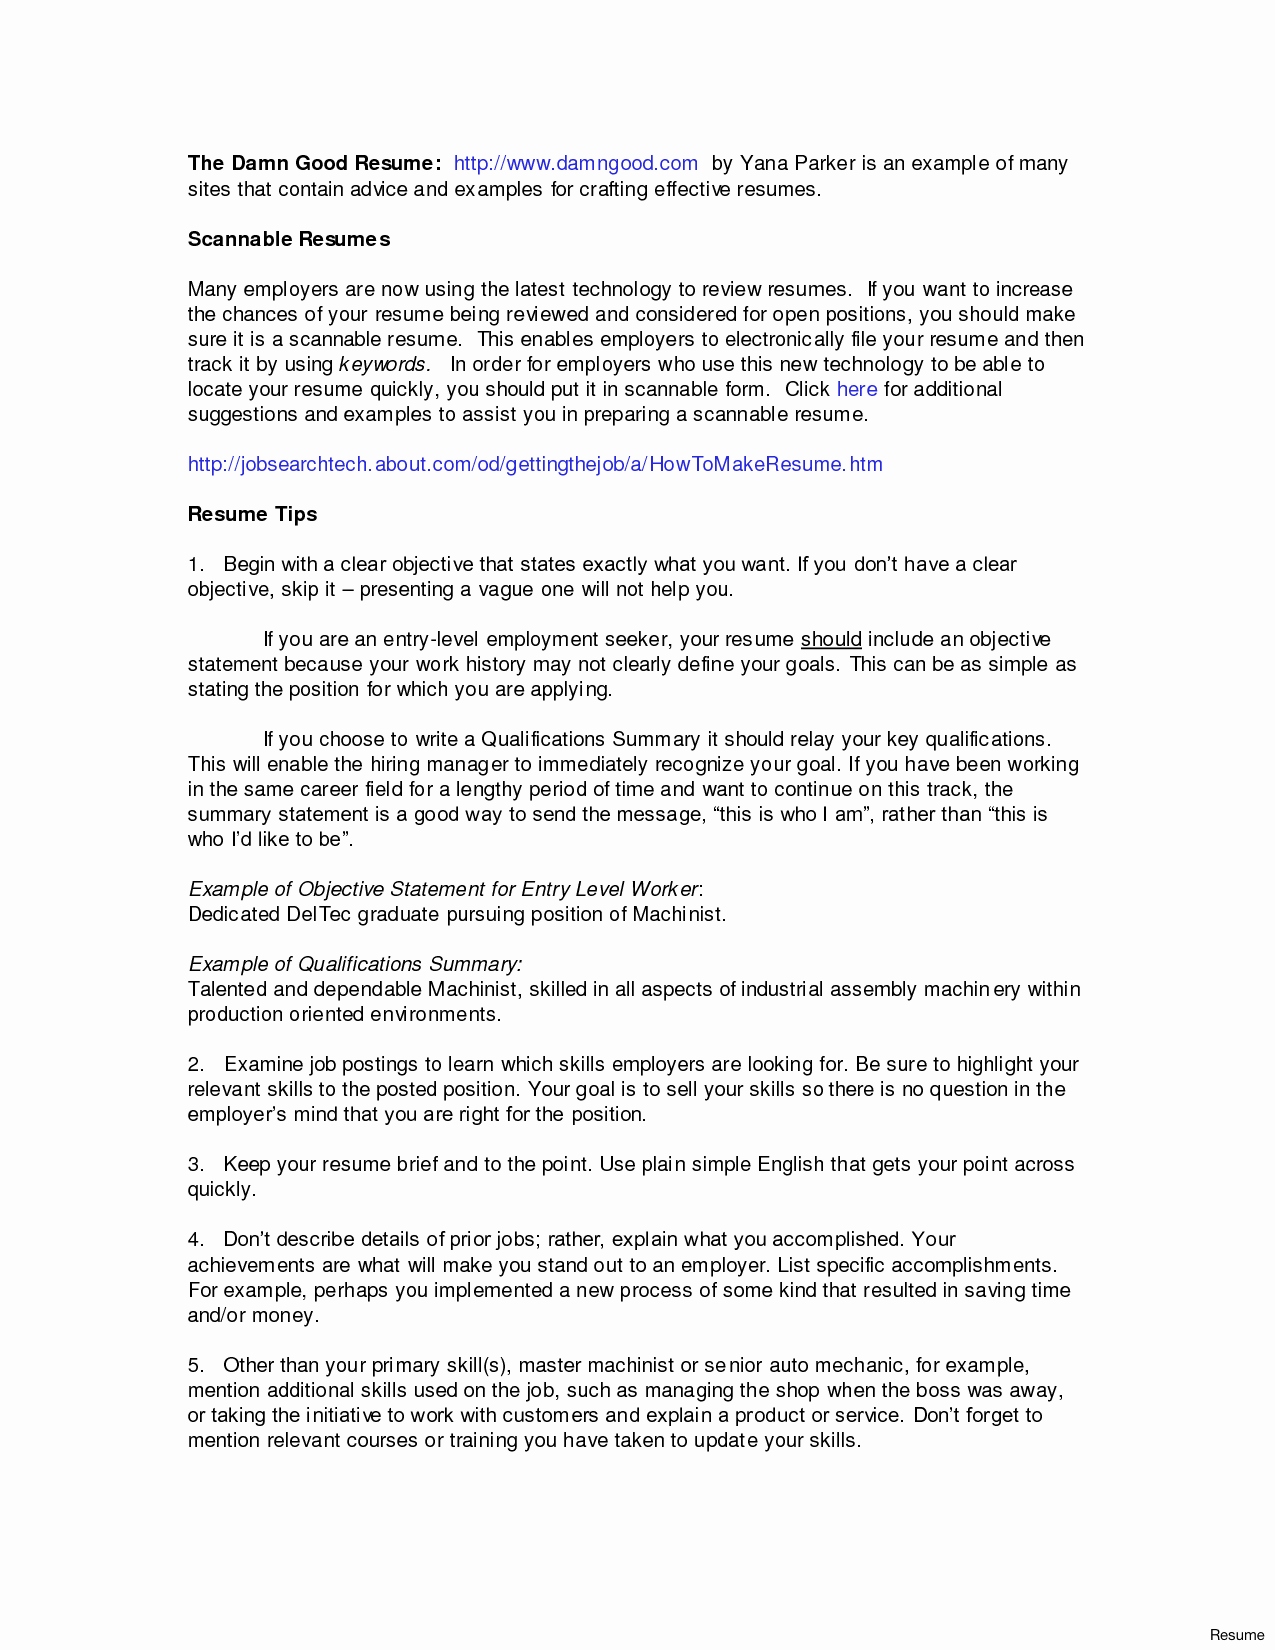 sears master protection agreement complai | worddocx